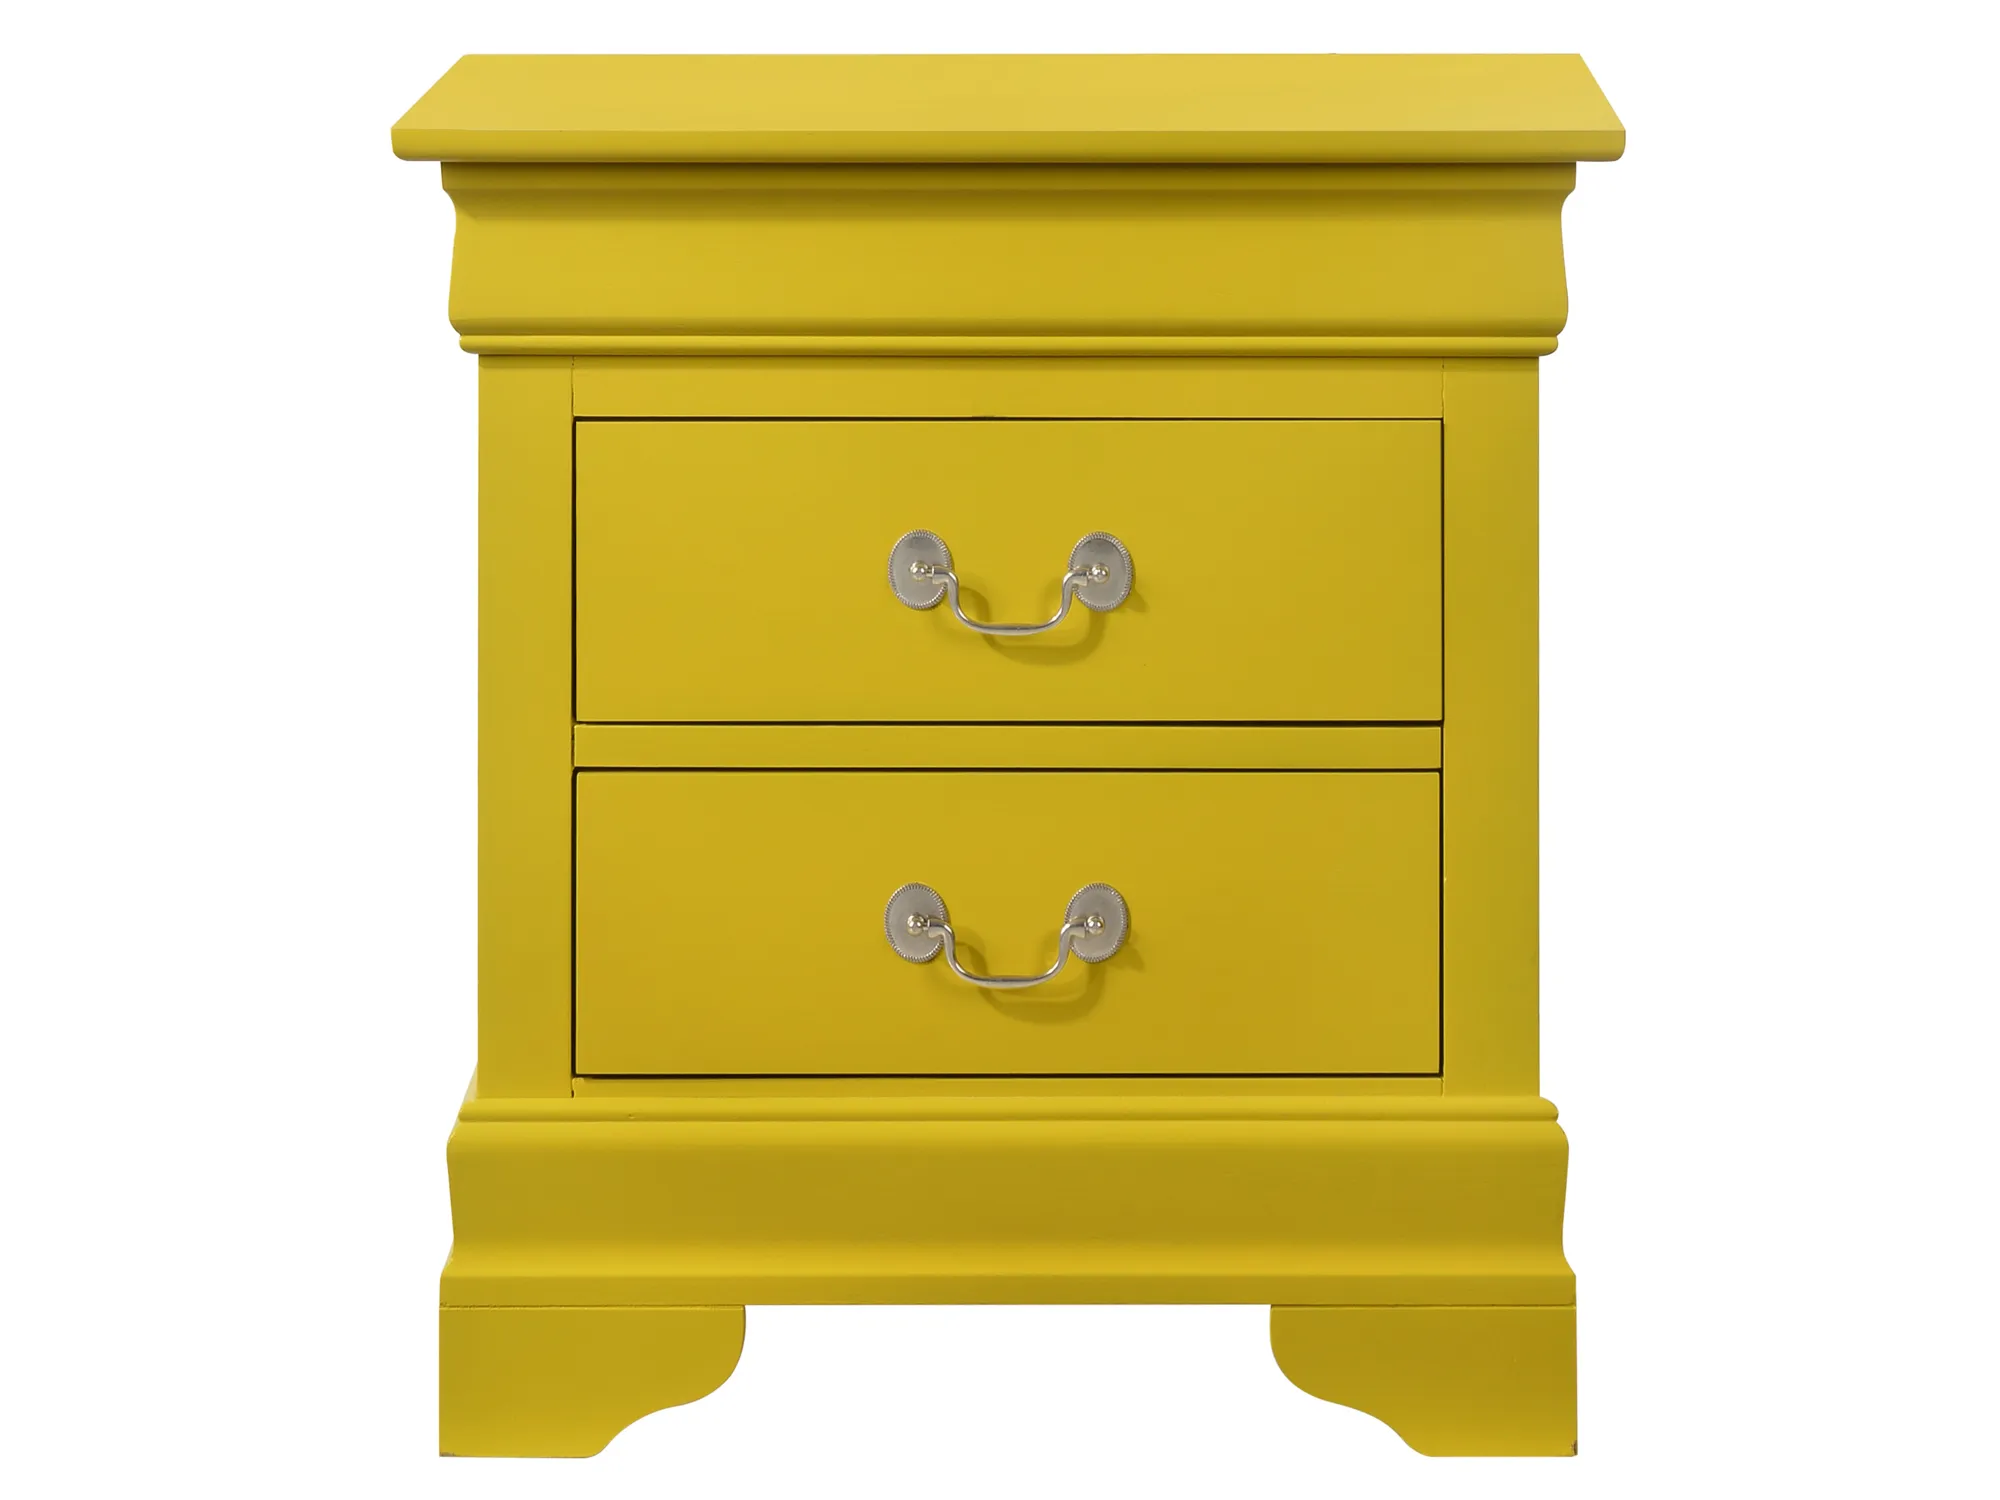 Louis Philippe 2-Drawer Nightstand (24 in. H X 22 in. W X 16 in. D)